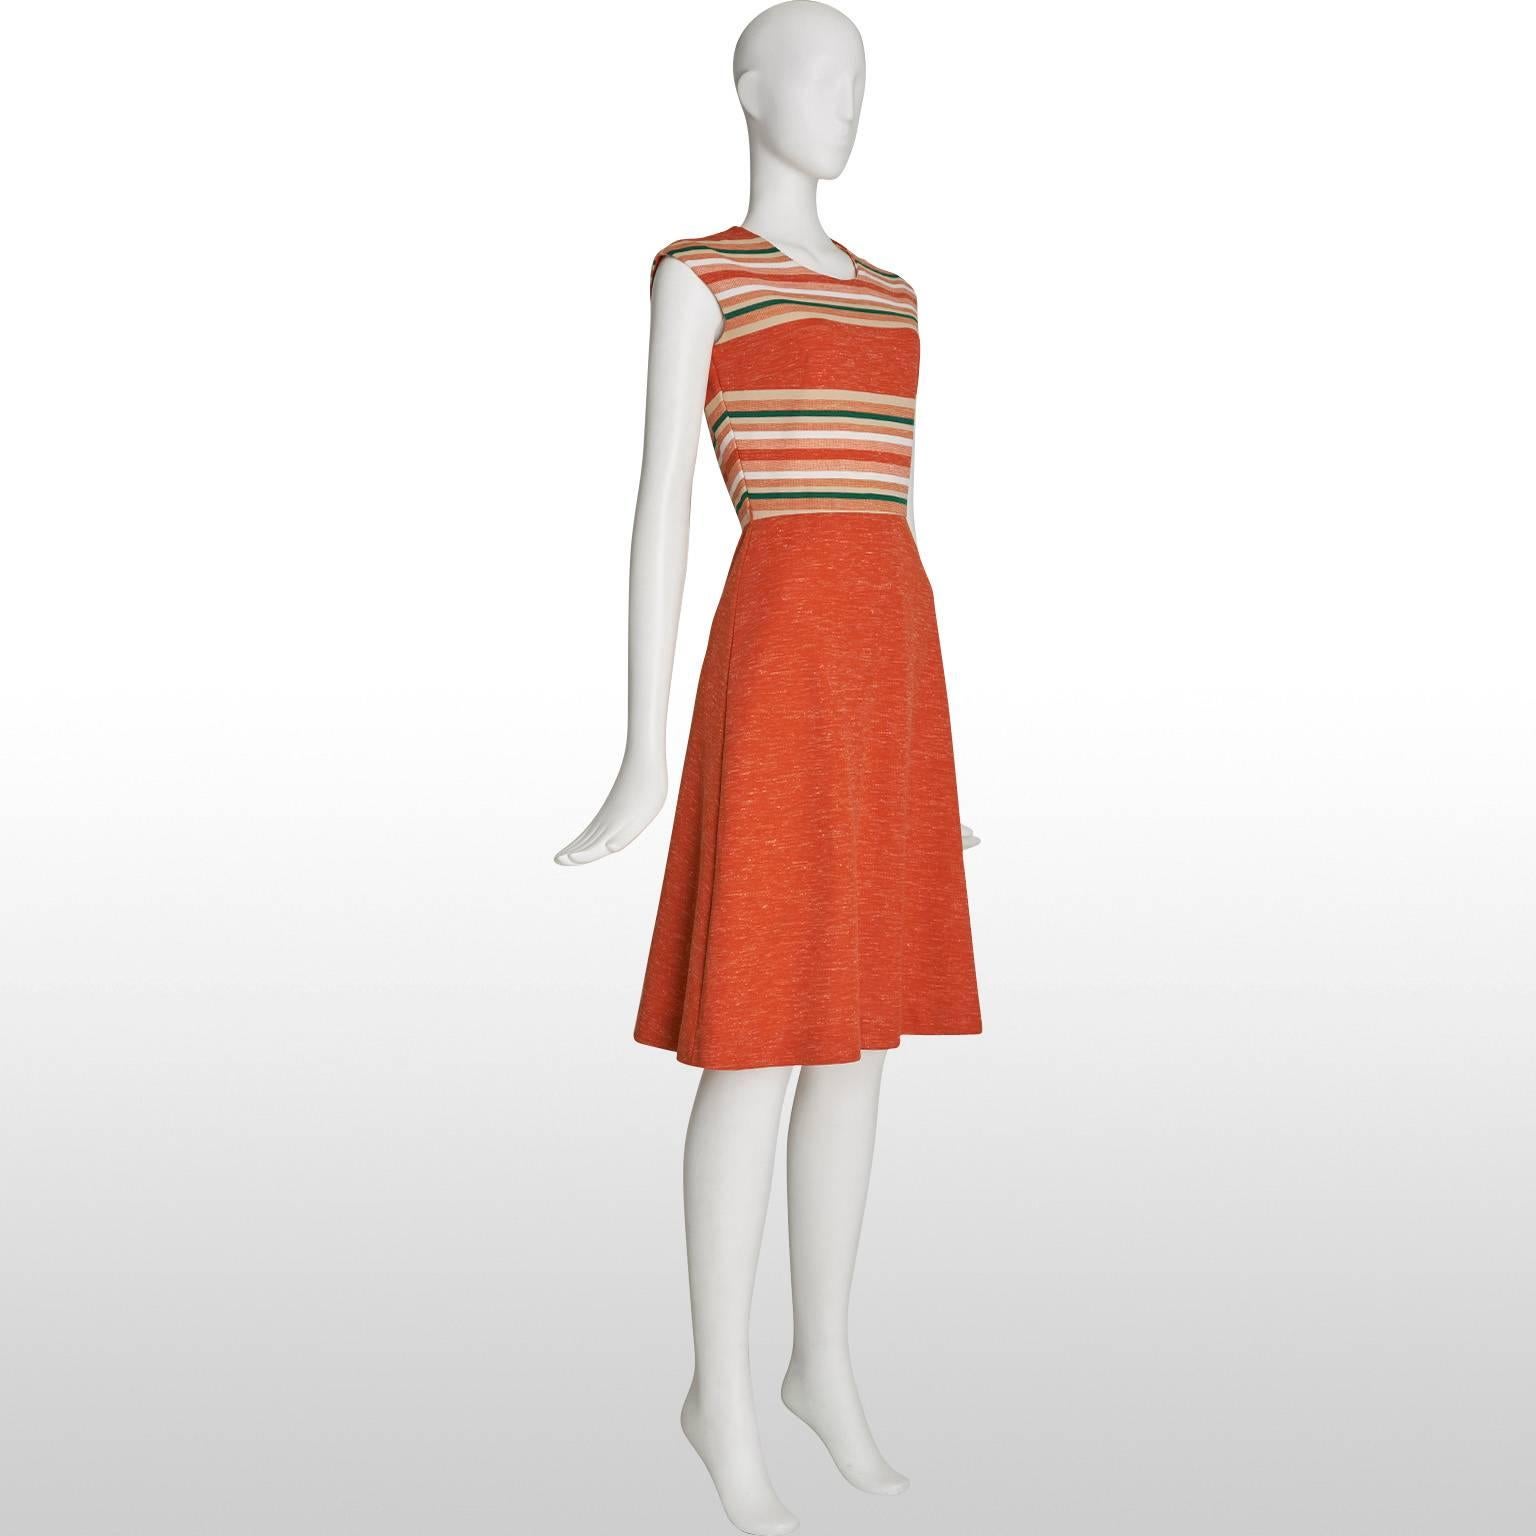 Cute 1960s Jonathan Logan burnt orange dress and jacket two piece. Typically 60s style A line dress with funky striped detail with matching boxy cropped jacket. This piece is an ultimate spring staple, with the stripes adding a touch of the sports